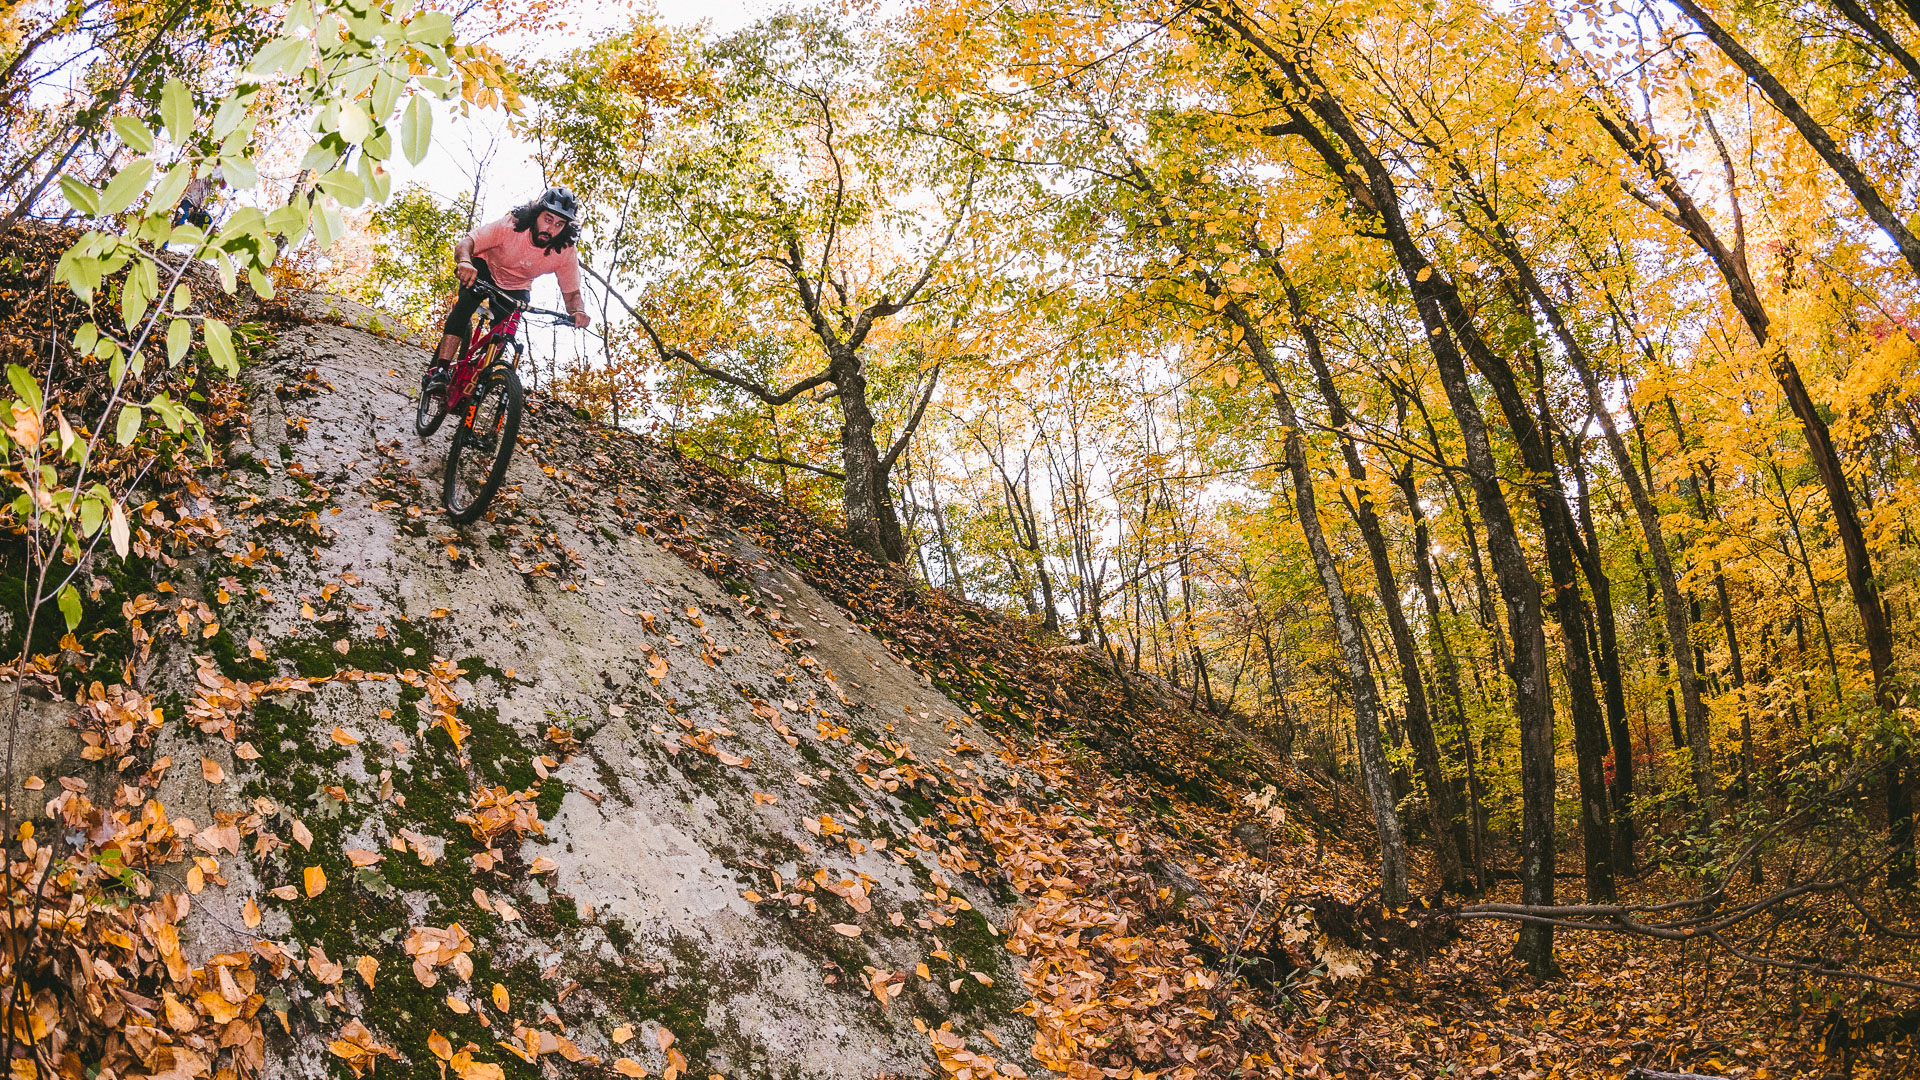 A mountain biker, Adam Jaber, descends a rock fact in a forest of fall colors.